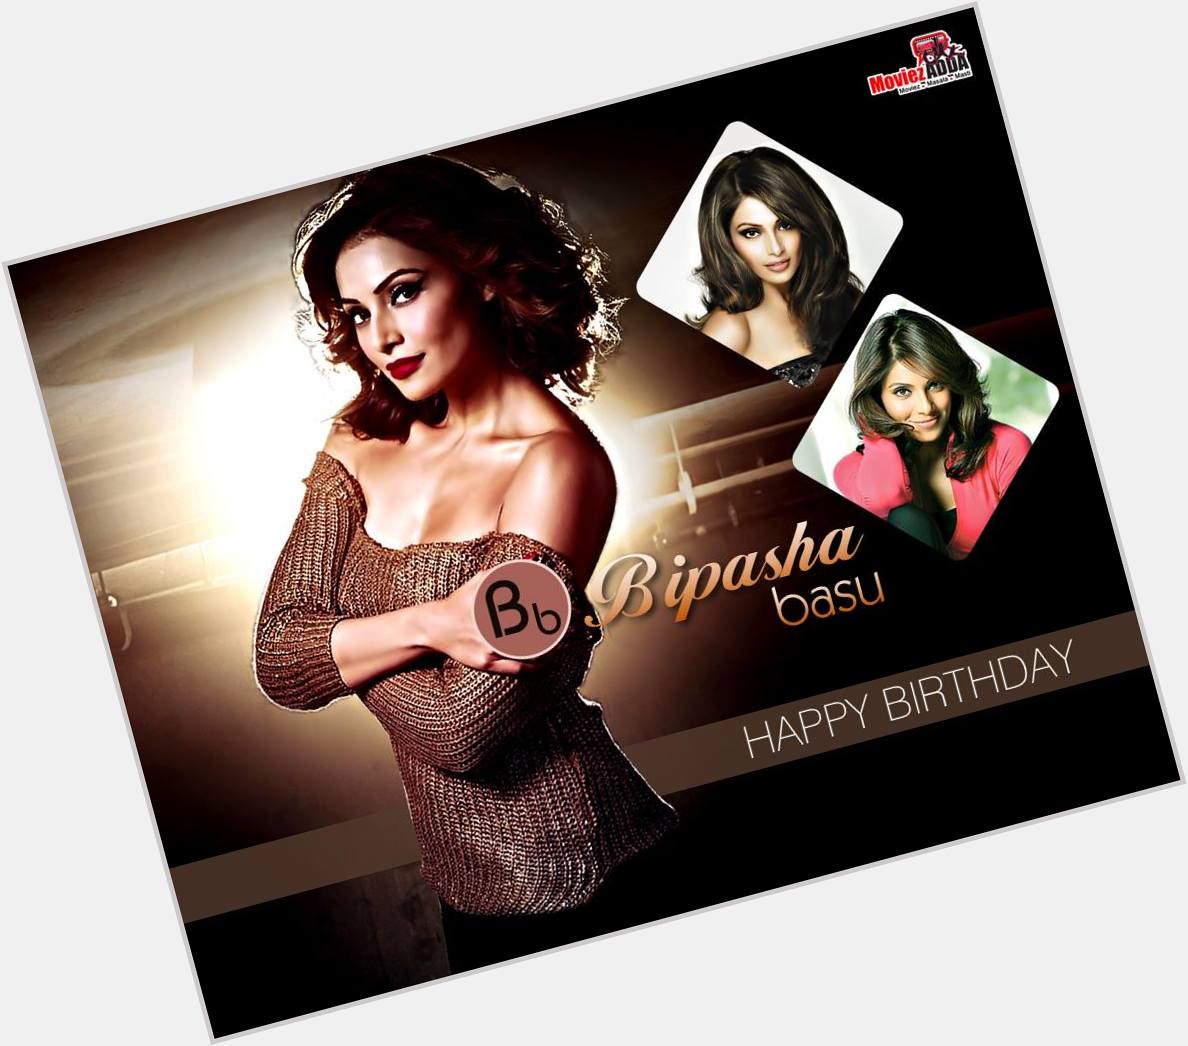  We Wish Bipasha Basu a Very Happy Birthday!!!

Remessage to Wish her | Follow us for more 